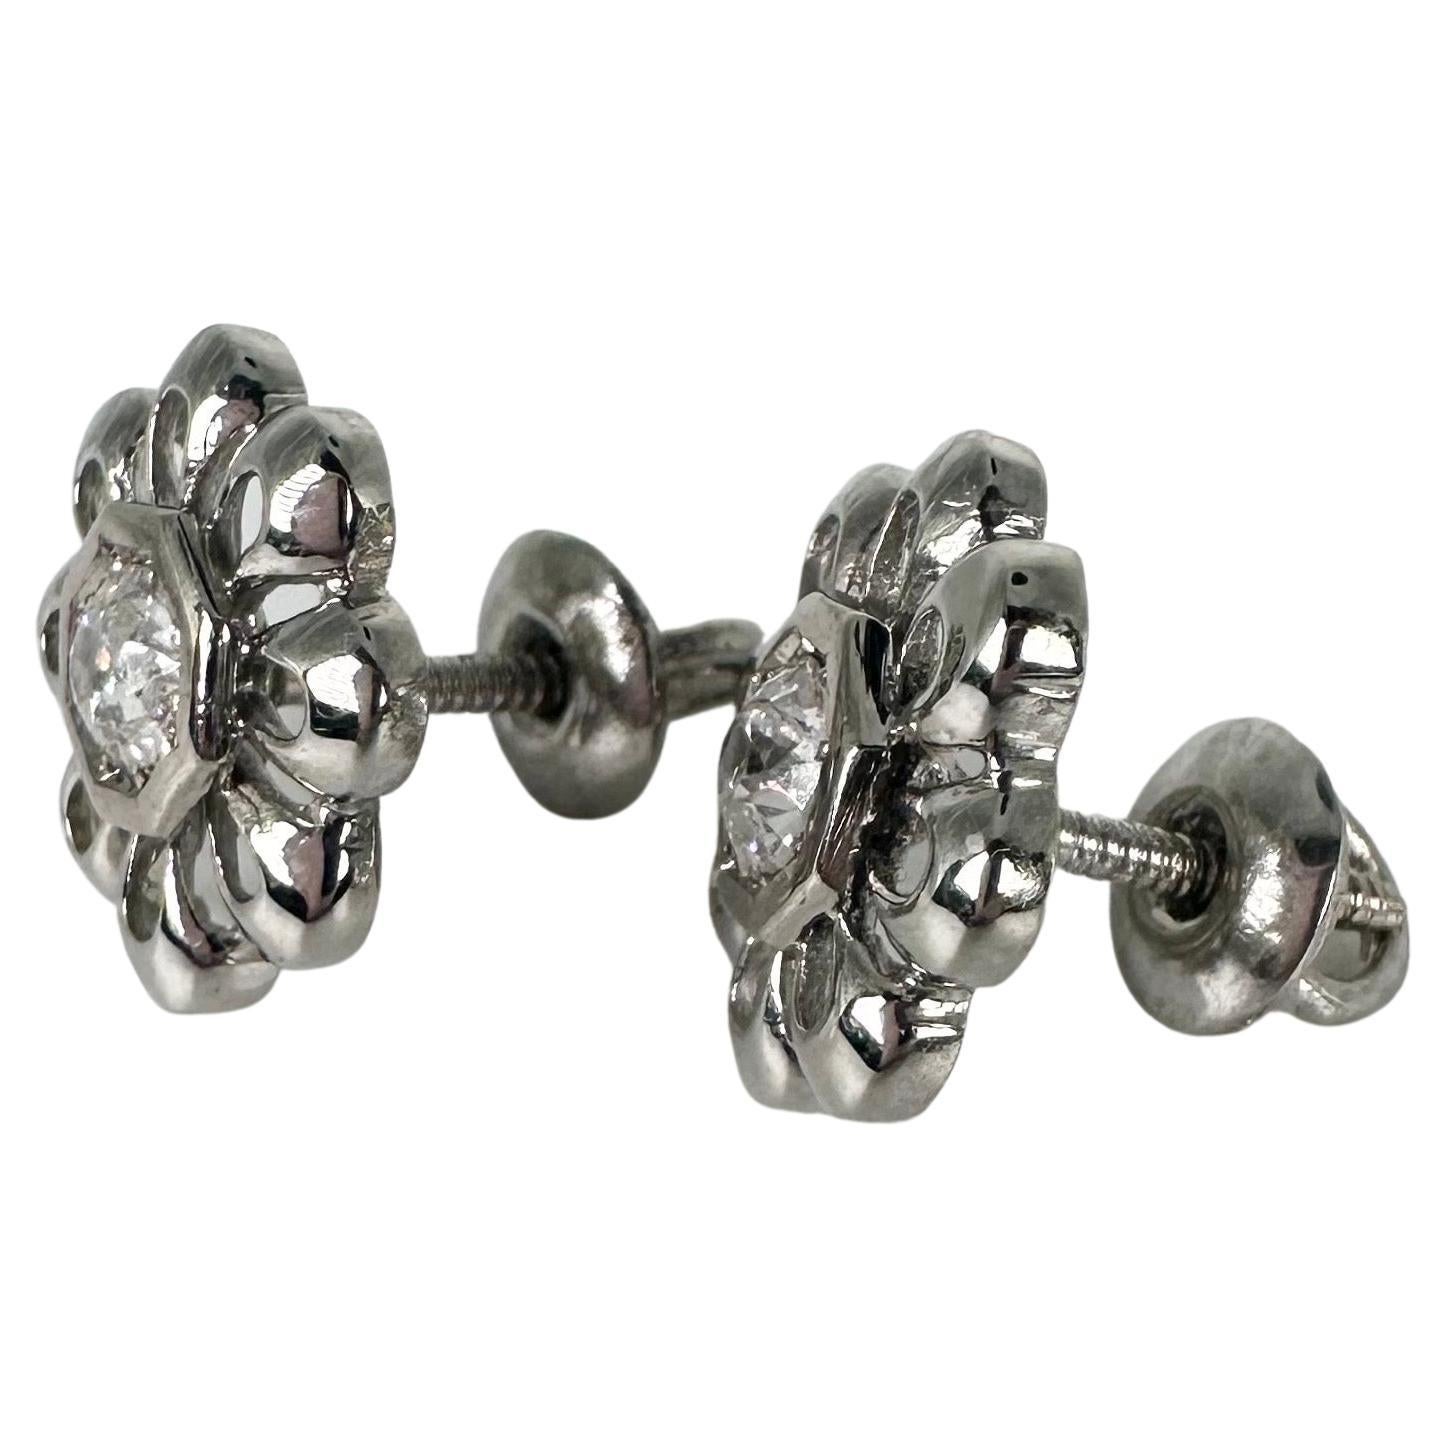 Floral stud earrings made with beautiful diamonds in a screw back setting for extra security, the earrings are made in 14KT white gold and look fabulous on any ears!

GOLD: 14KT gold
NATURAL DIAMOND(S)
Clarity/Color: SI/H
Carat:0.36ct
Cut:Round (old